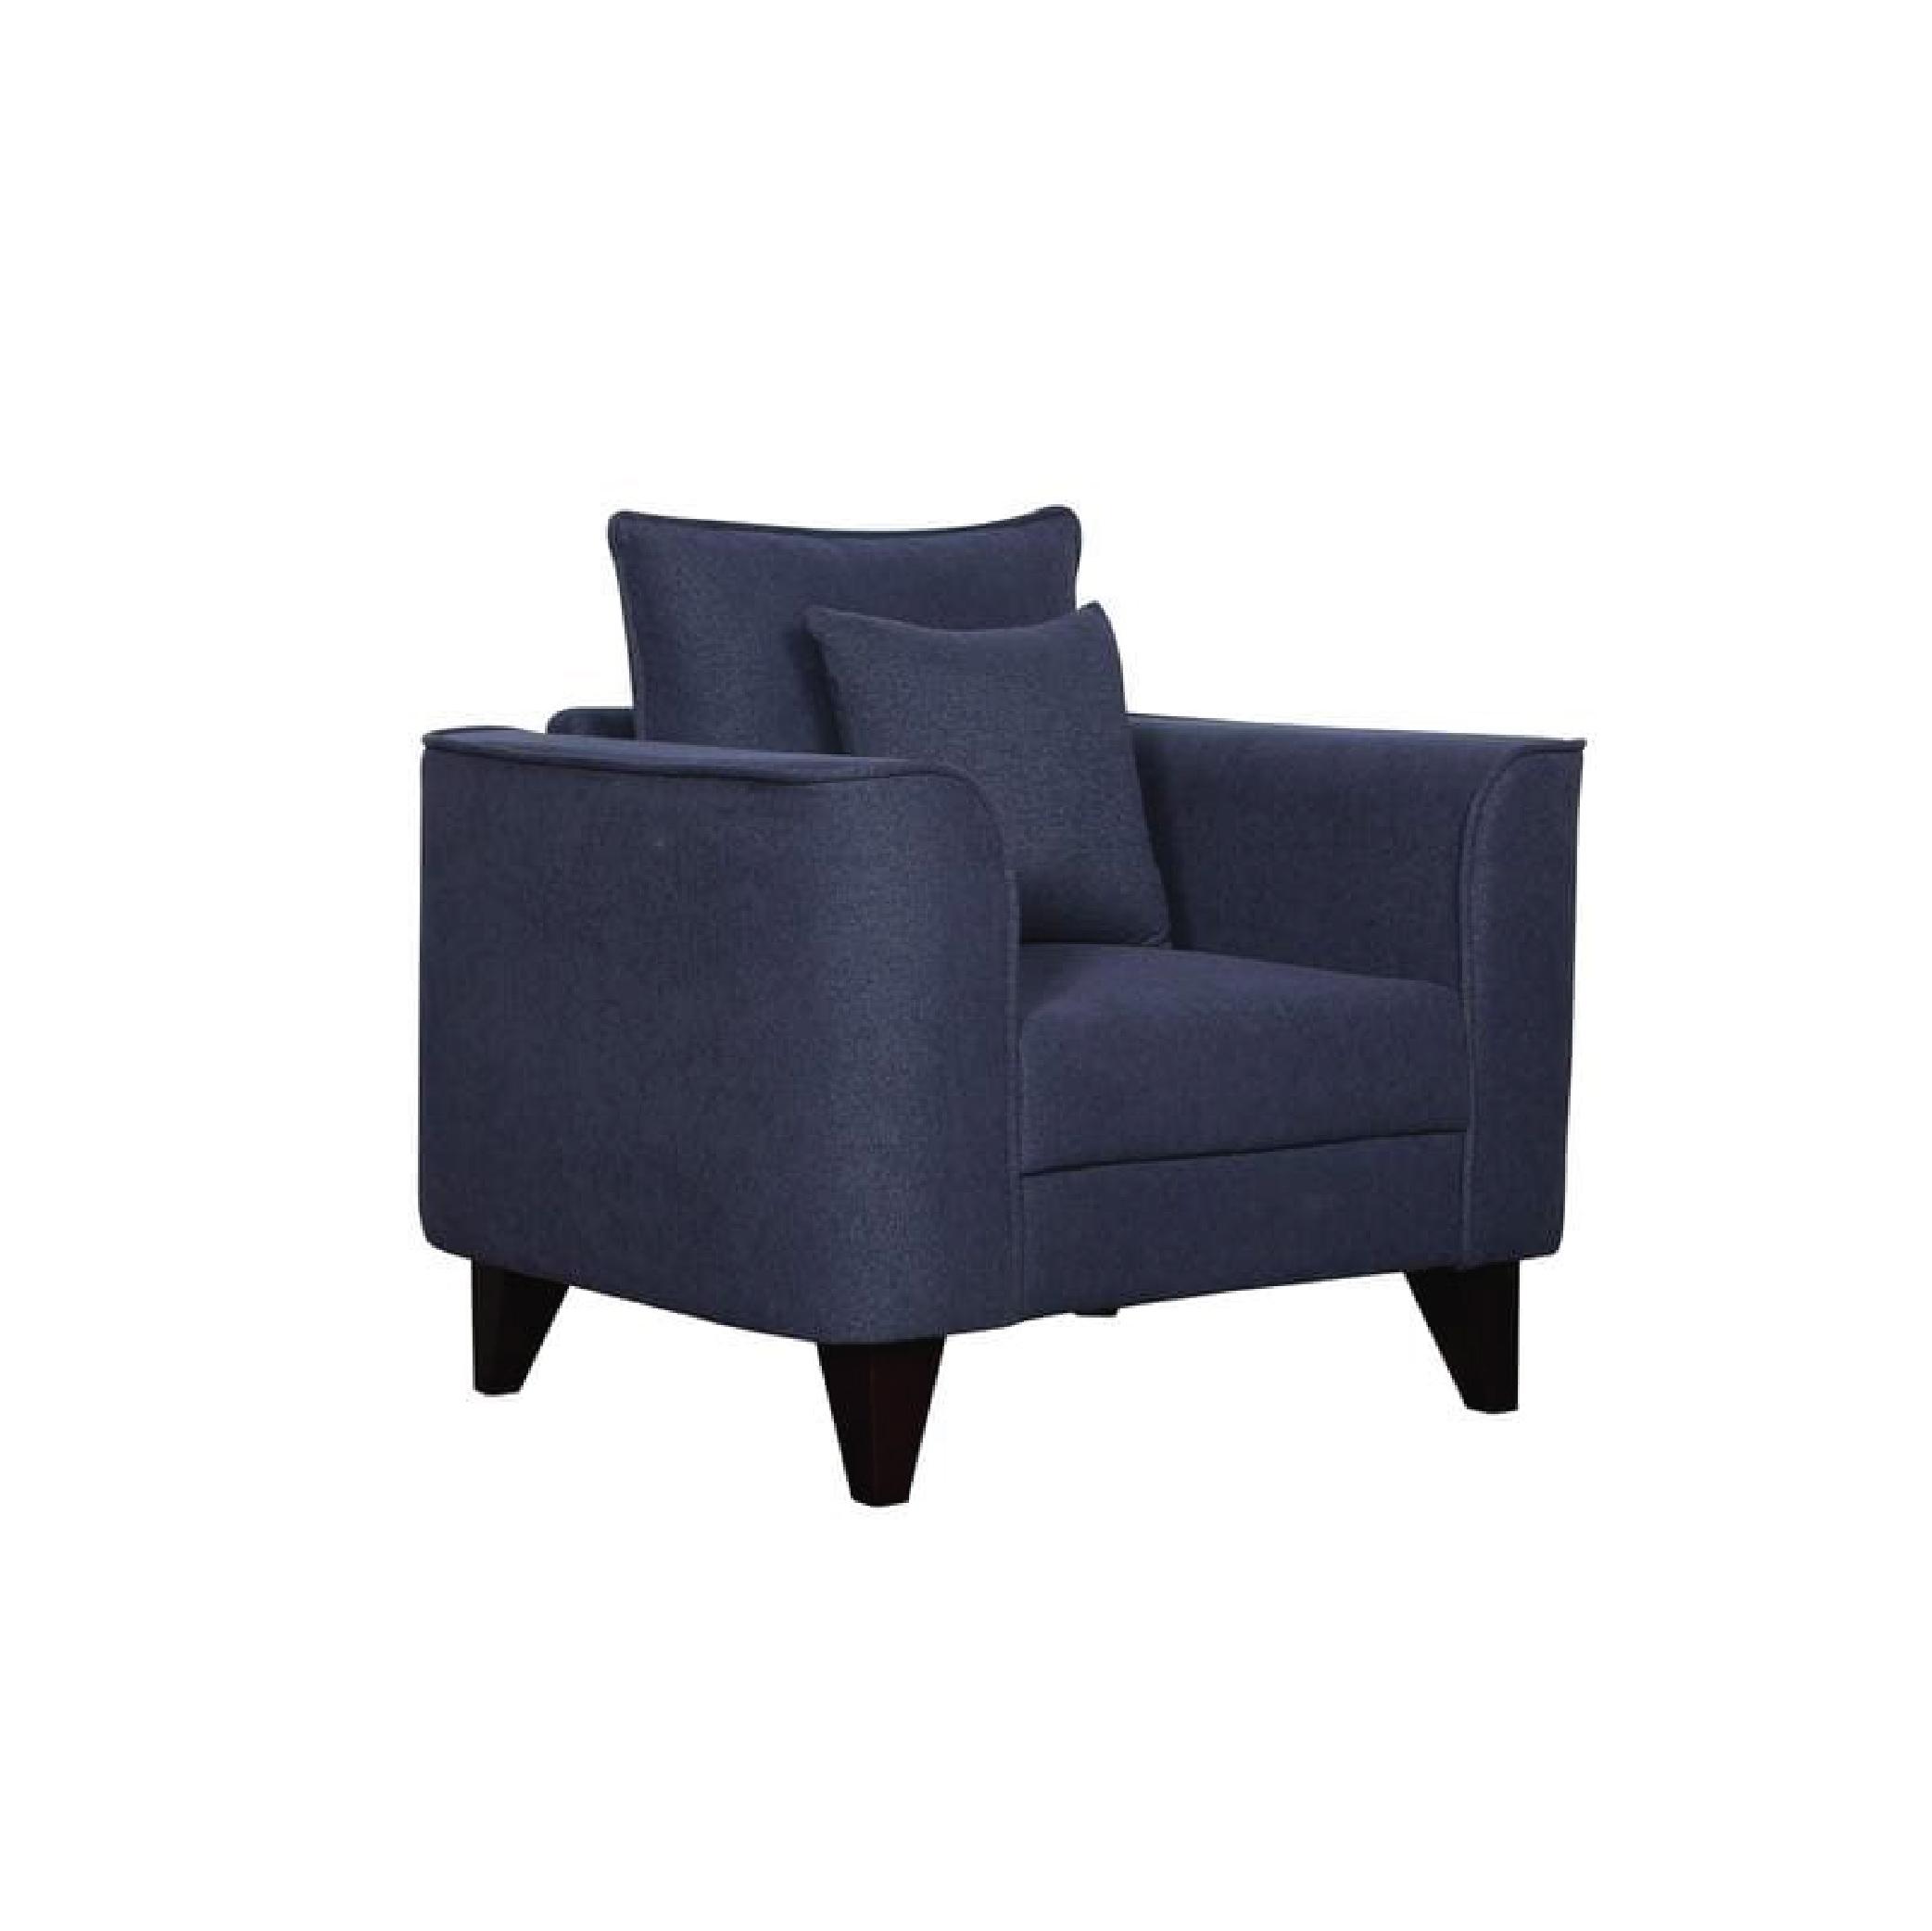 Sessa One Seater Sofa in Navy Blue Colour